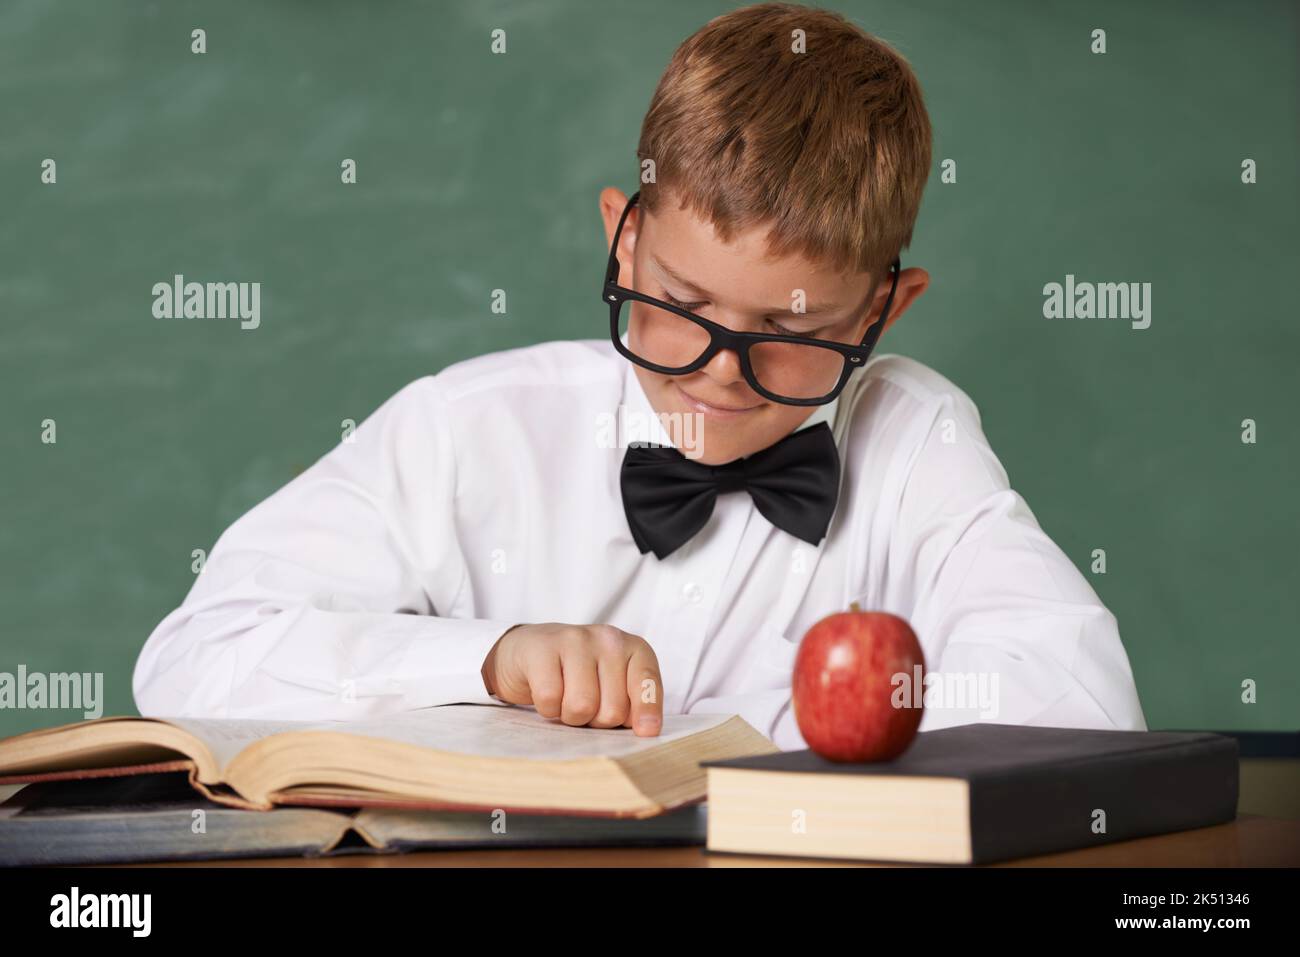 He loves to read. A young boy wearing glasses and a bow-tie concentrating on his reading with a red apple on the table in front of him. Stock Photo